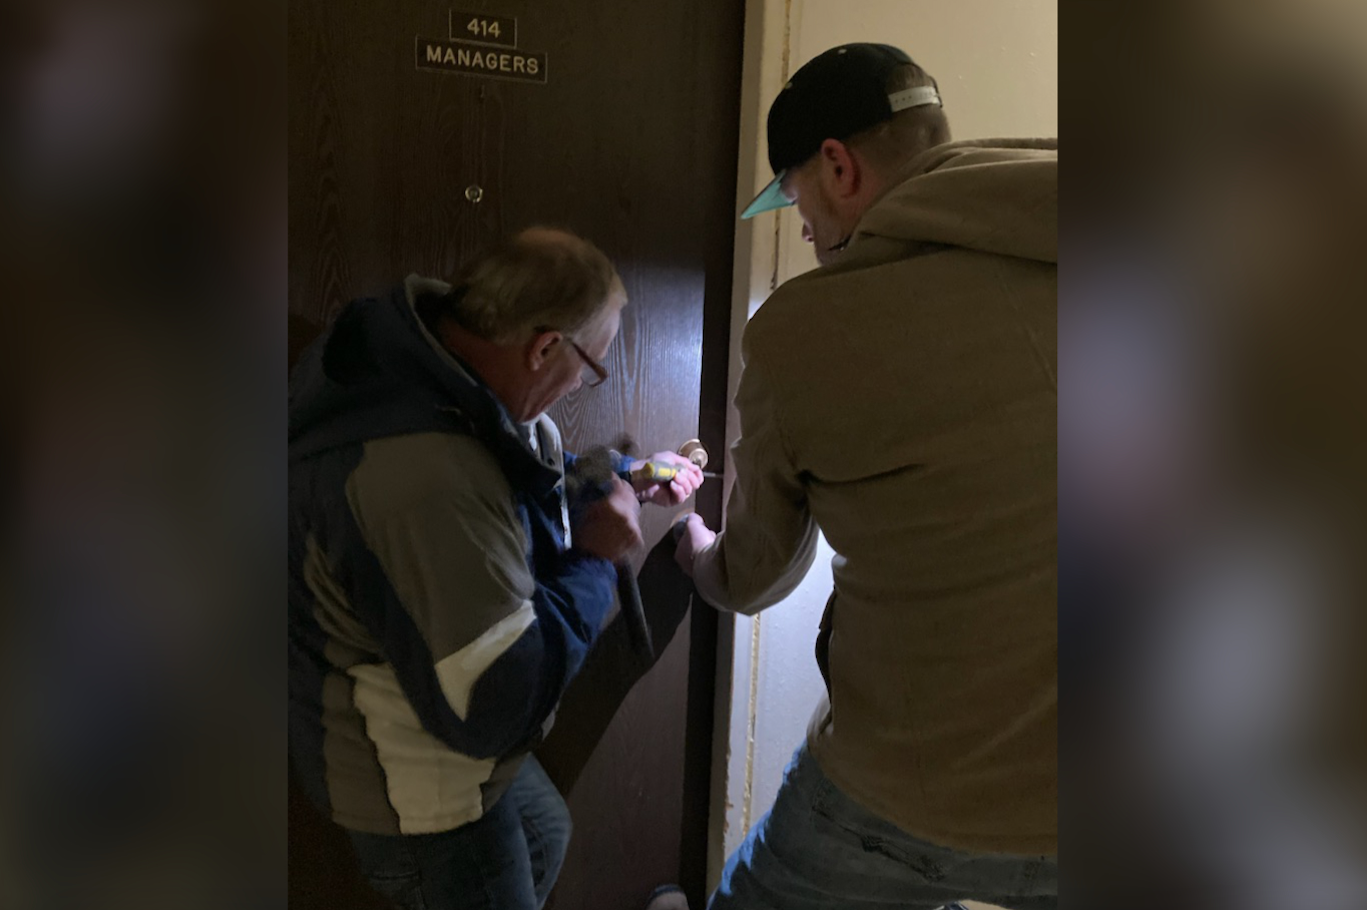 Terrace Mayor Sean Bujtas (right) gaining entry to the managers’ office at Coachman Apartments. (Submitted photo)